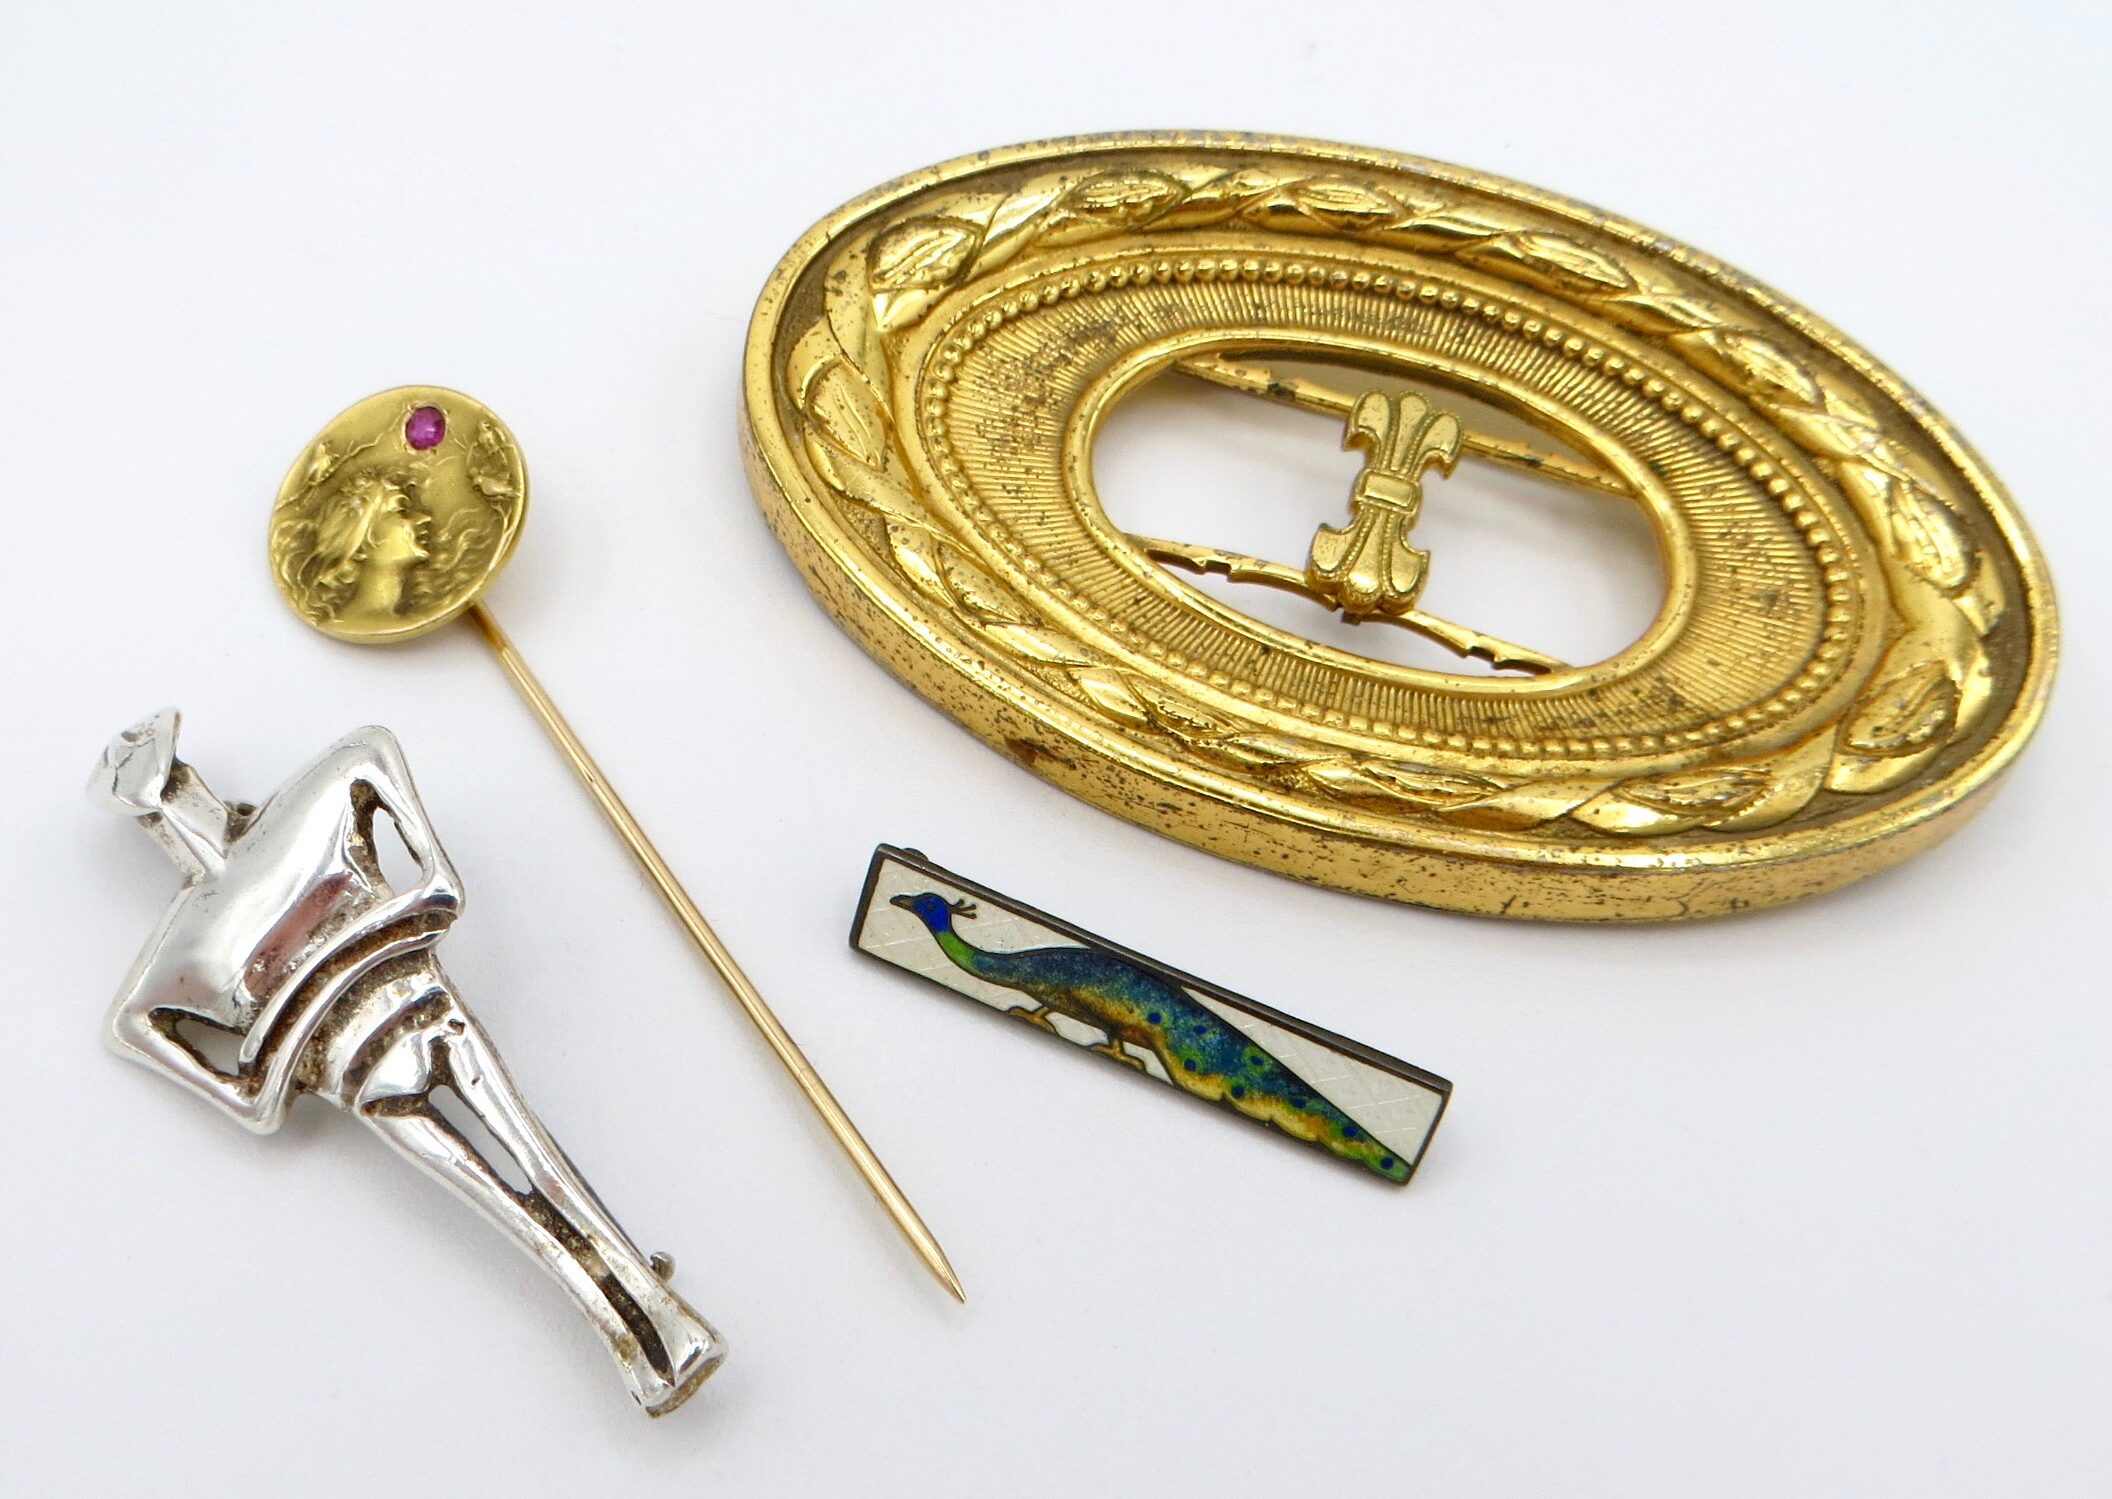 L-R: A sterling silver stylized brooch, a gold and ruby stick pin, and enamel bar brooch and a vintage kilt pin.